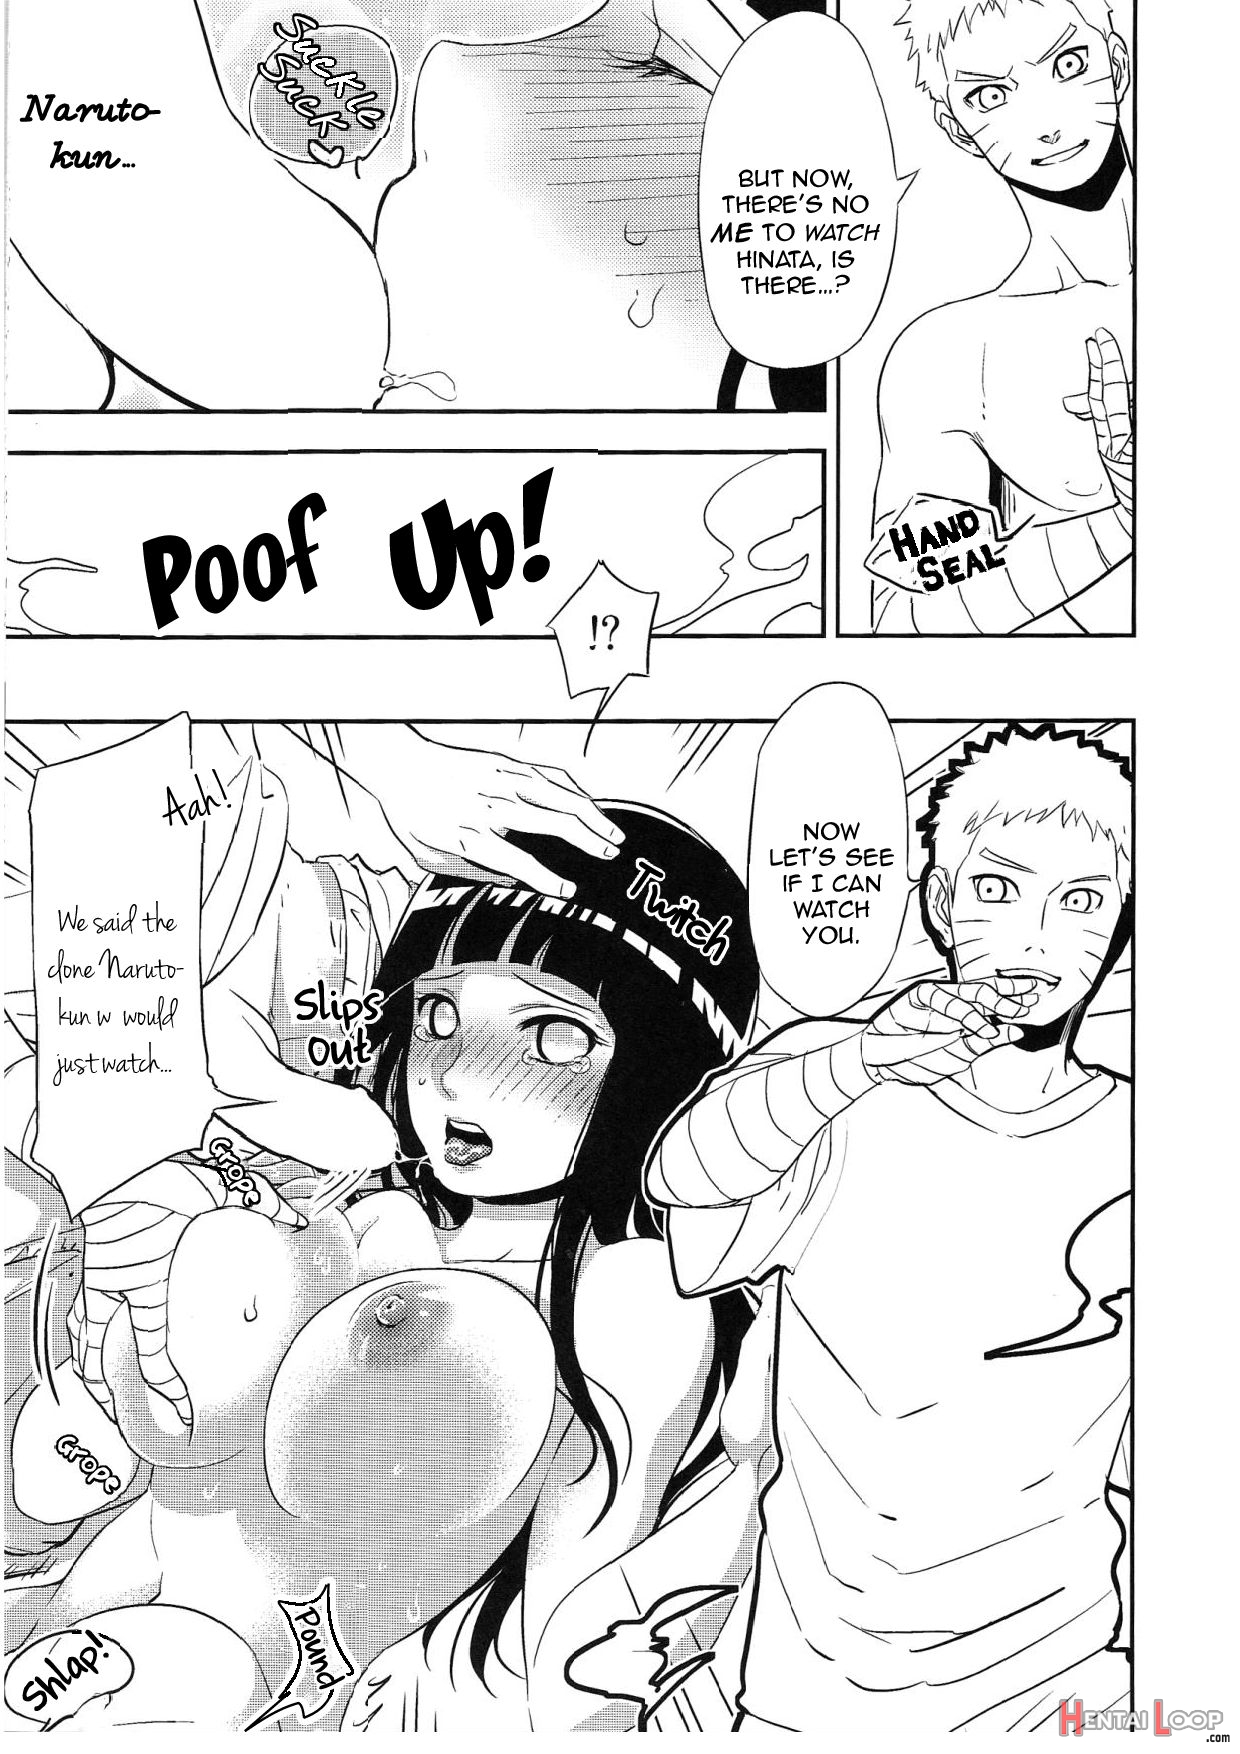 Naruto-kun Its Impossible For Me To Say No To You page 21